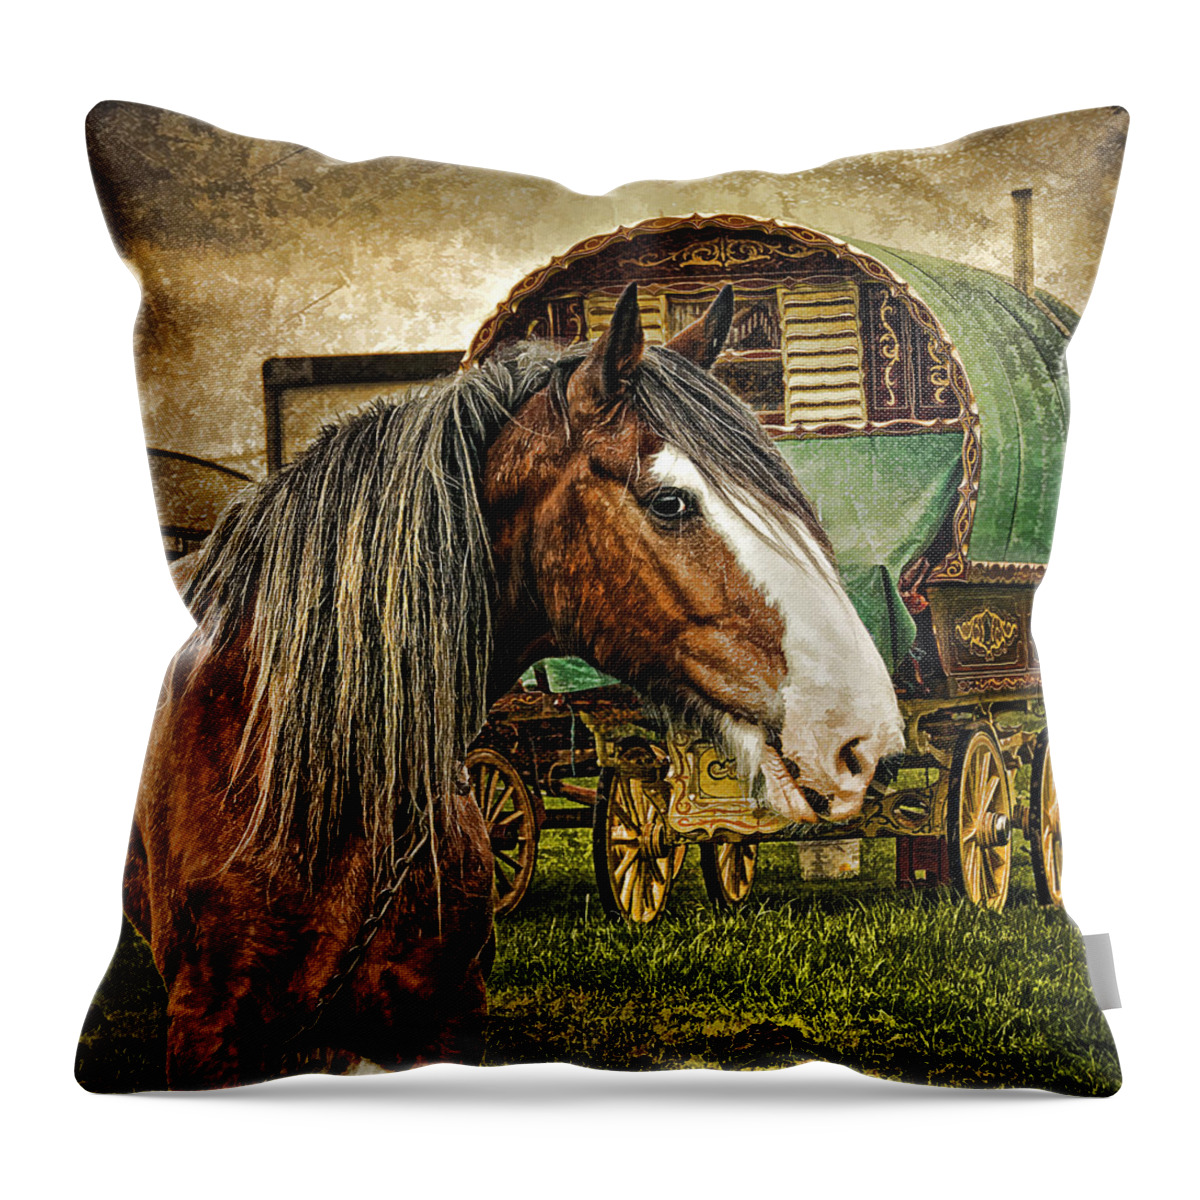 Gypsy Horse Throw Pillow featuring the photograph The Gypsy Vanner by Brian Tarr